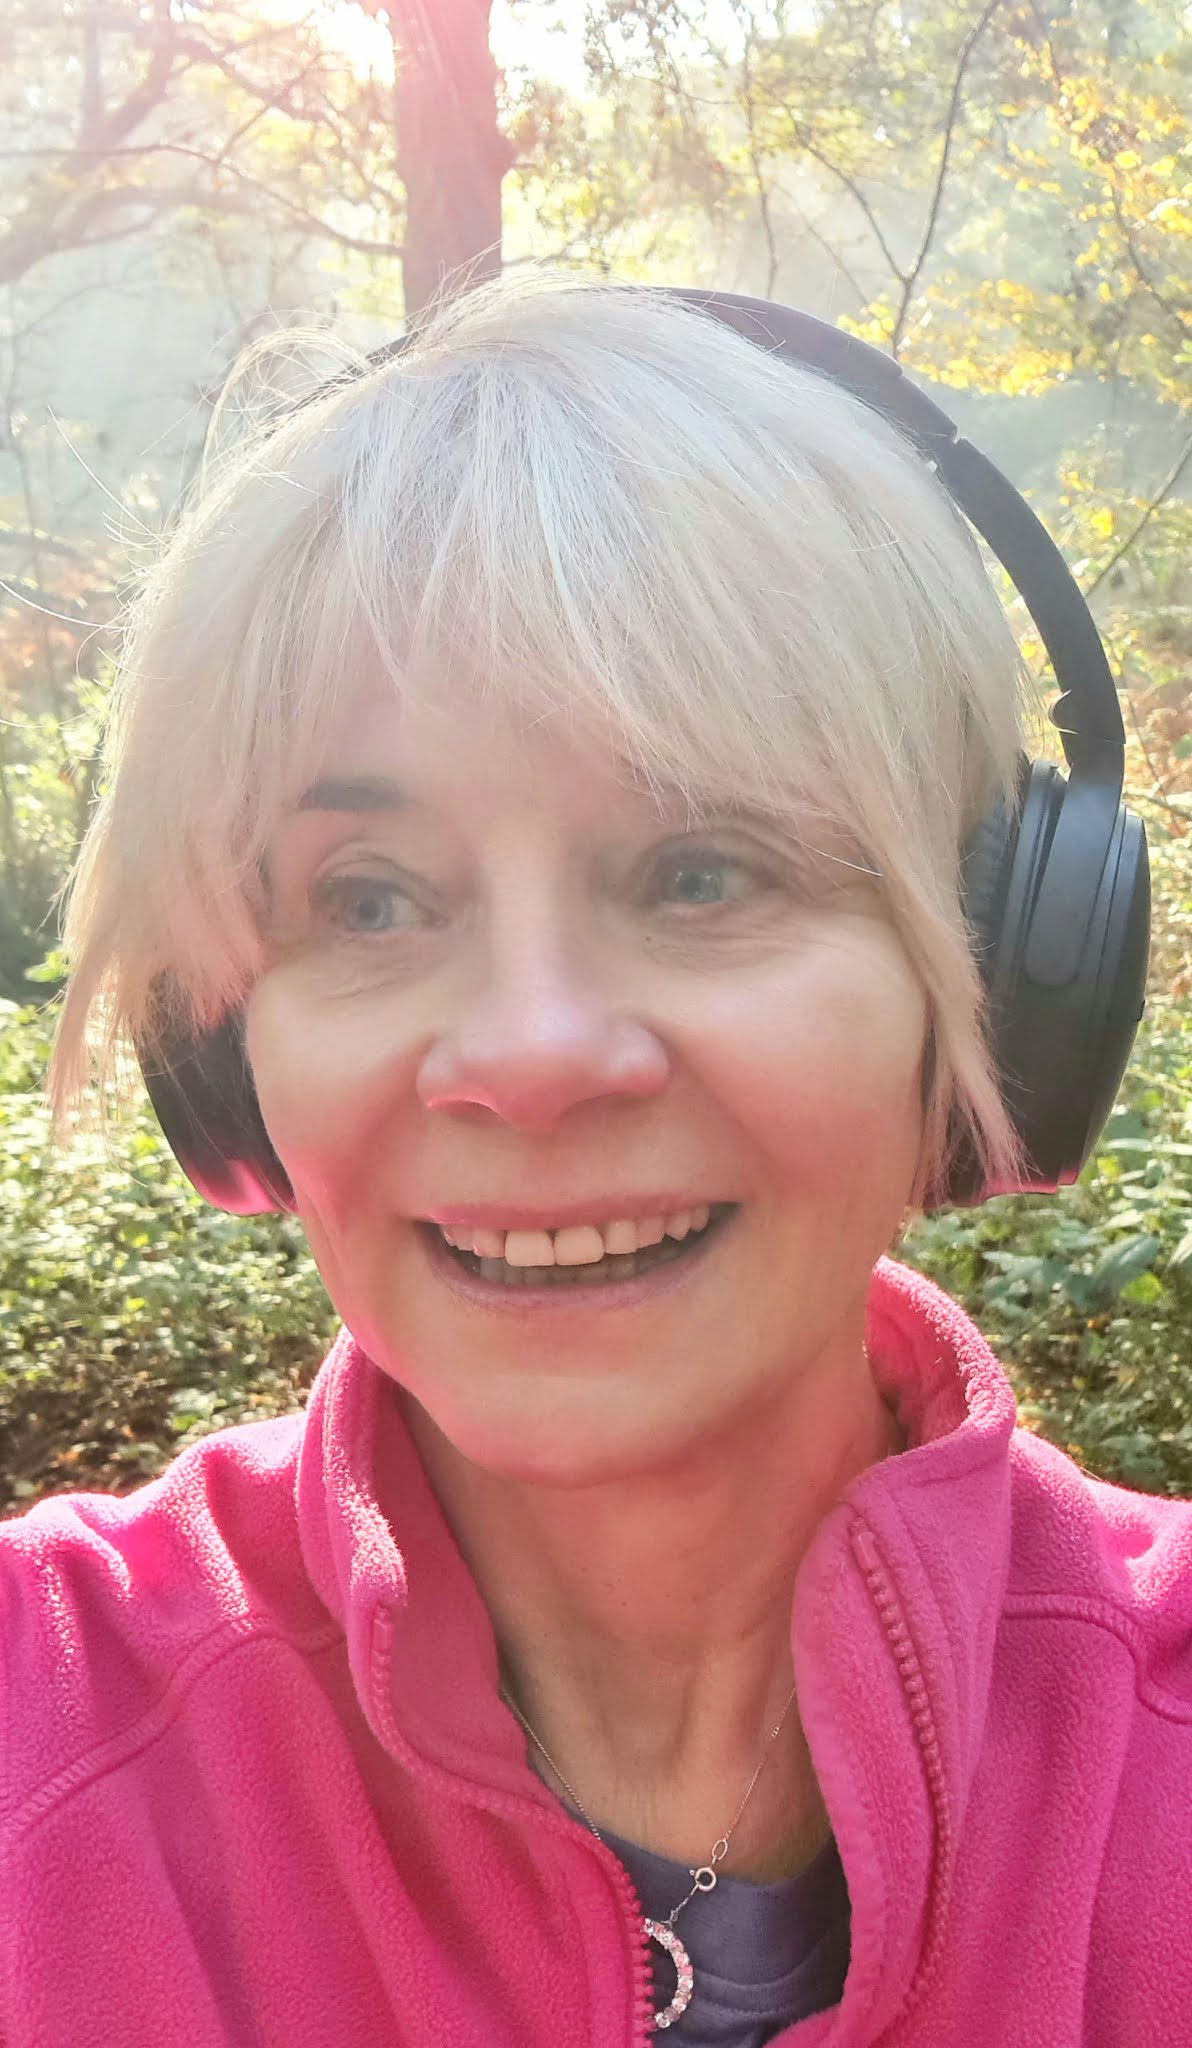 Gail Hanlon from Is This Mutton walking in Epping Forest with her headphones and podcasts for company